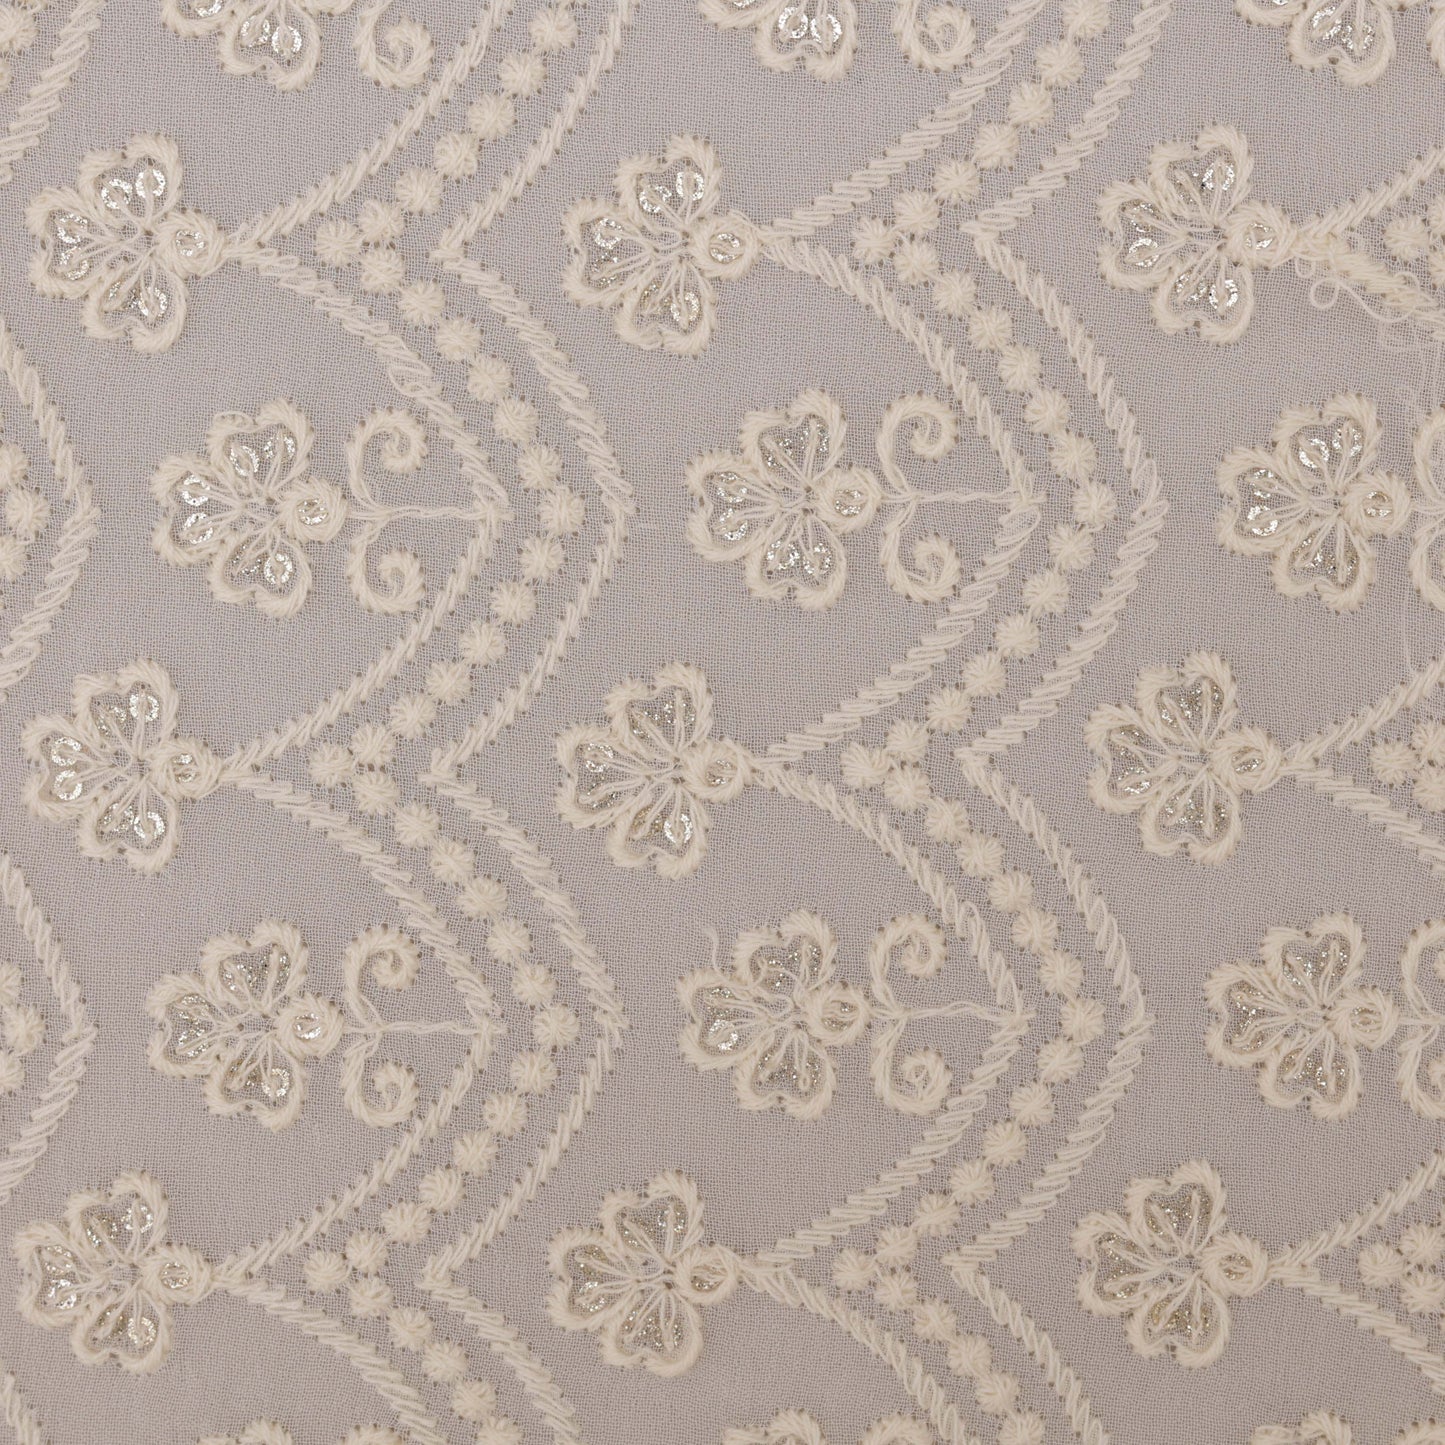 White Color Georgette Embroidery Fabric